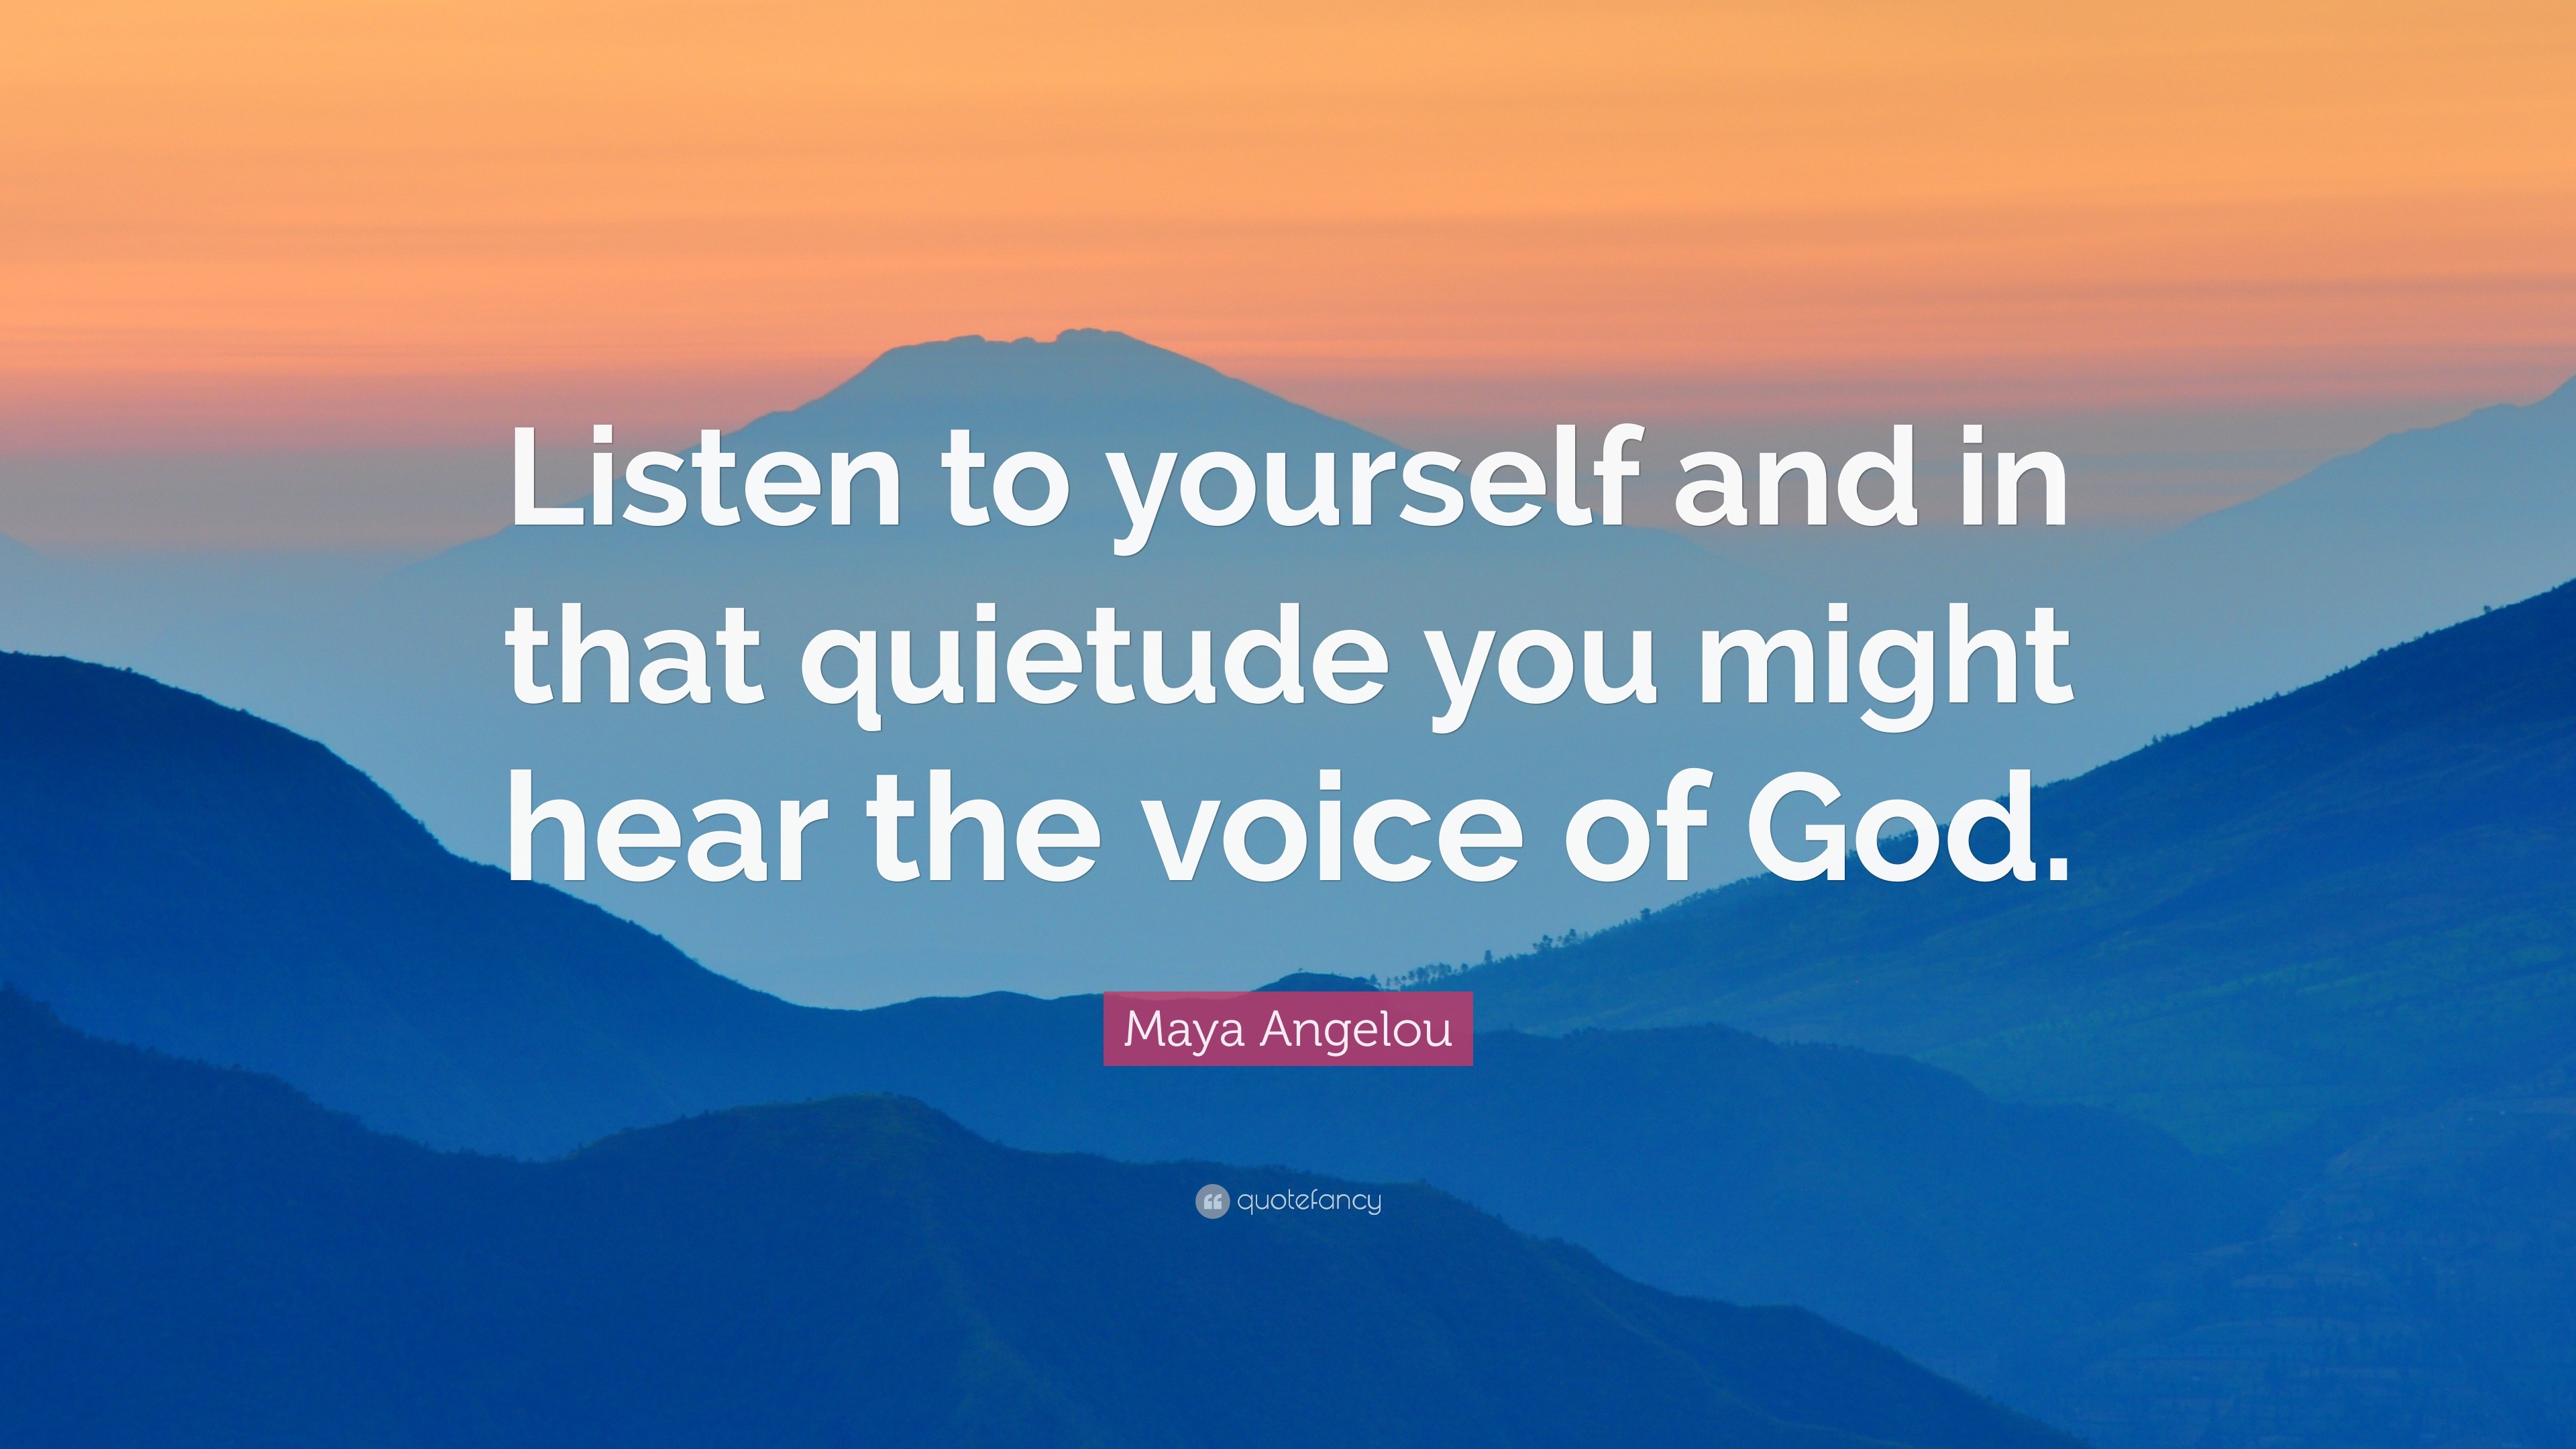 Maya Angelou Quote “Listen to yourself and in that quietude you might